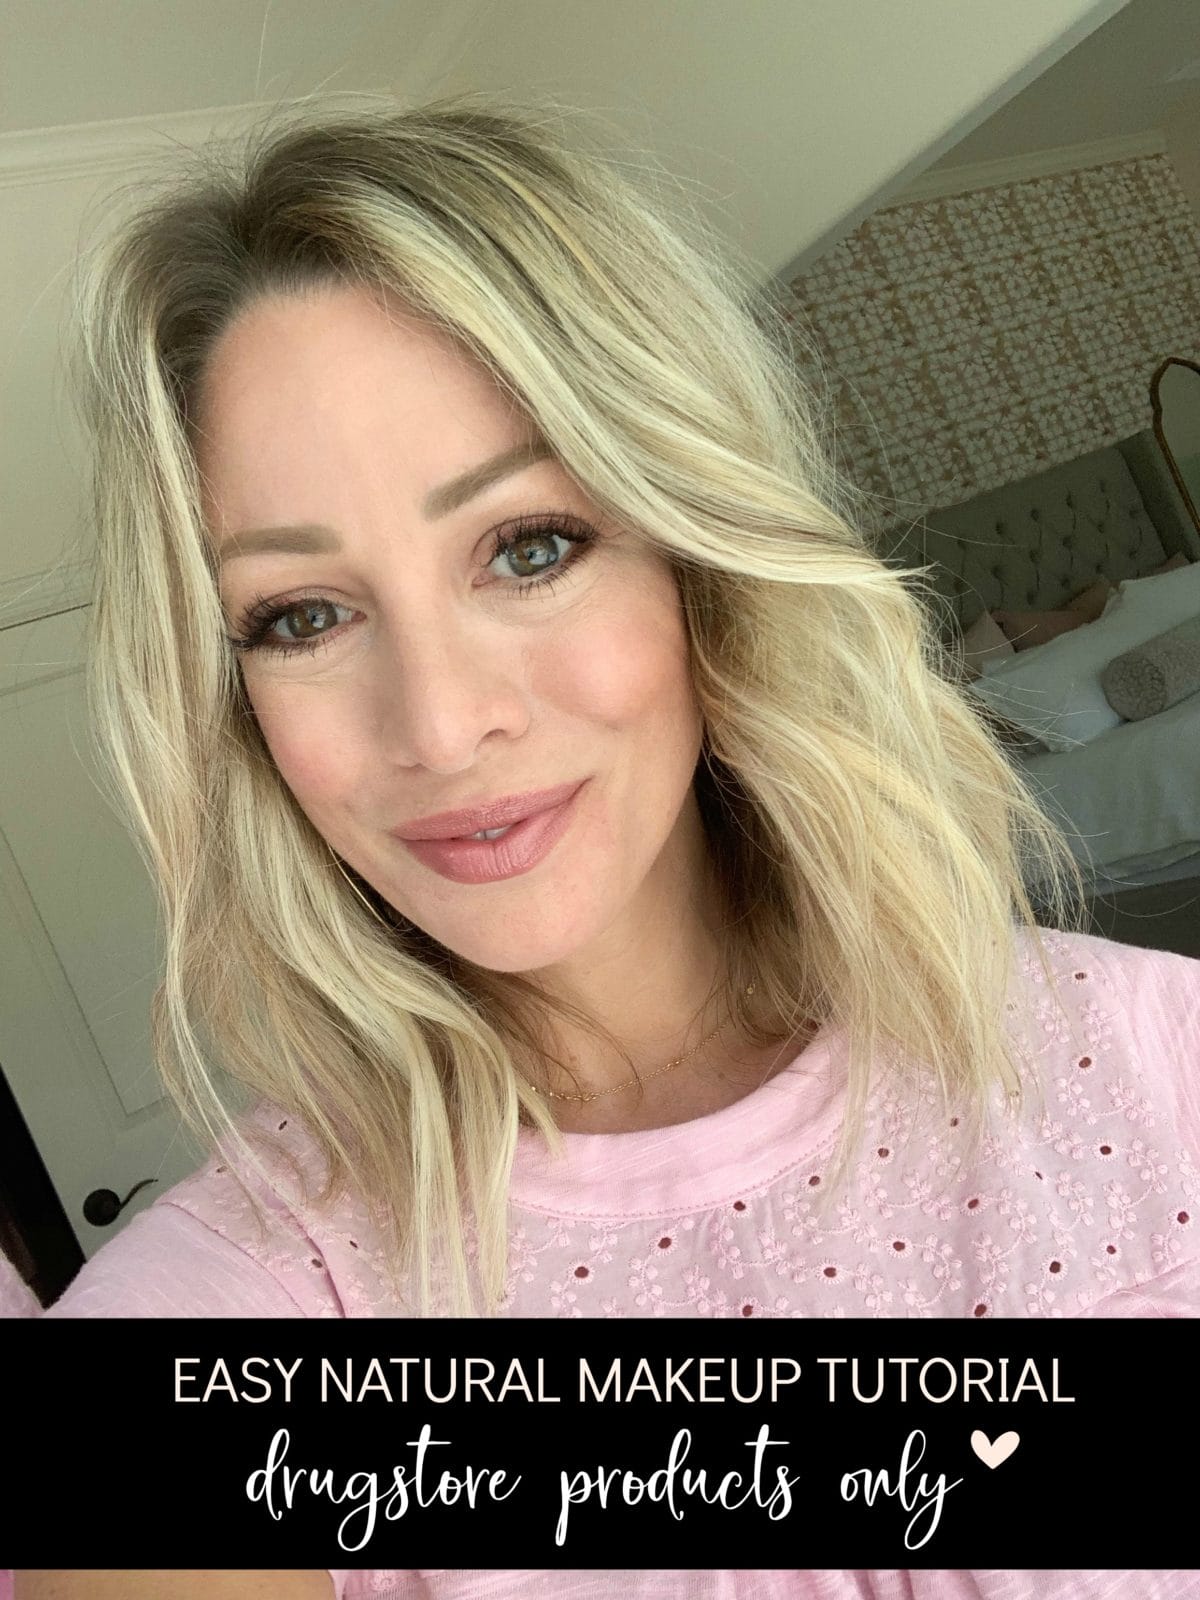 Easy Natural Makeup Tutorial Drugstore Products Only